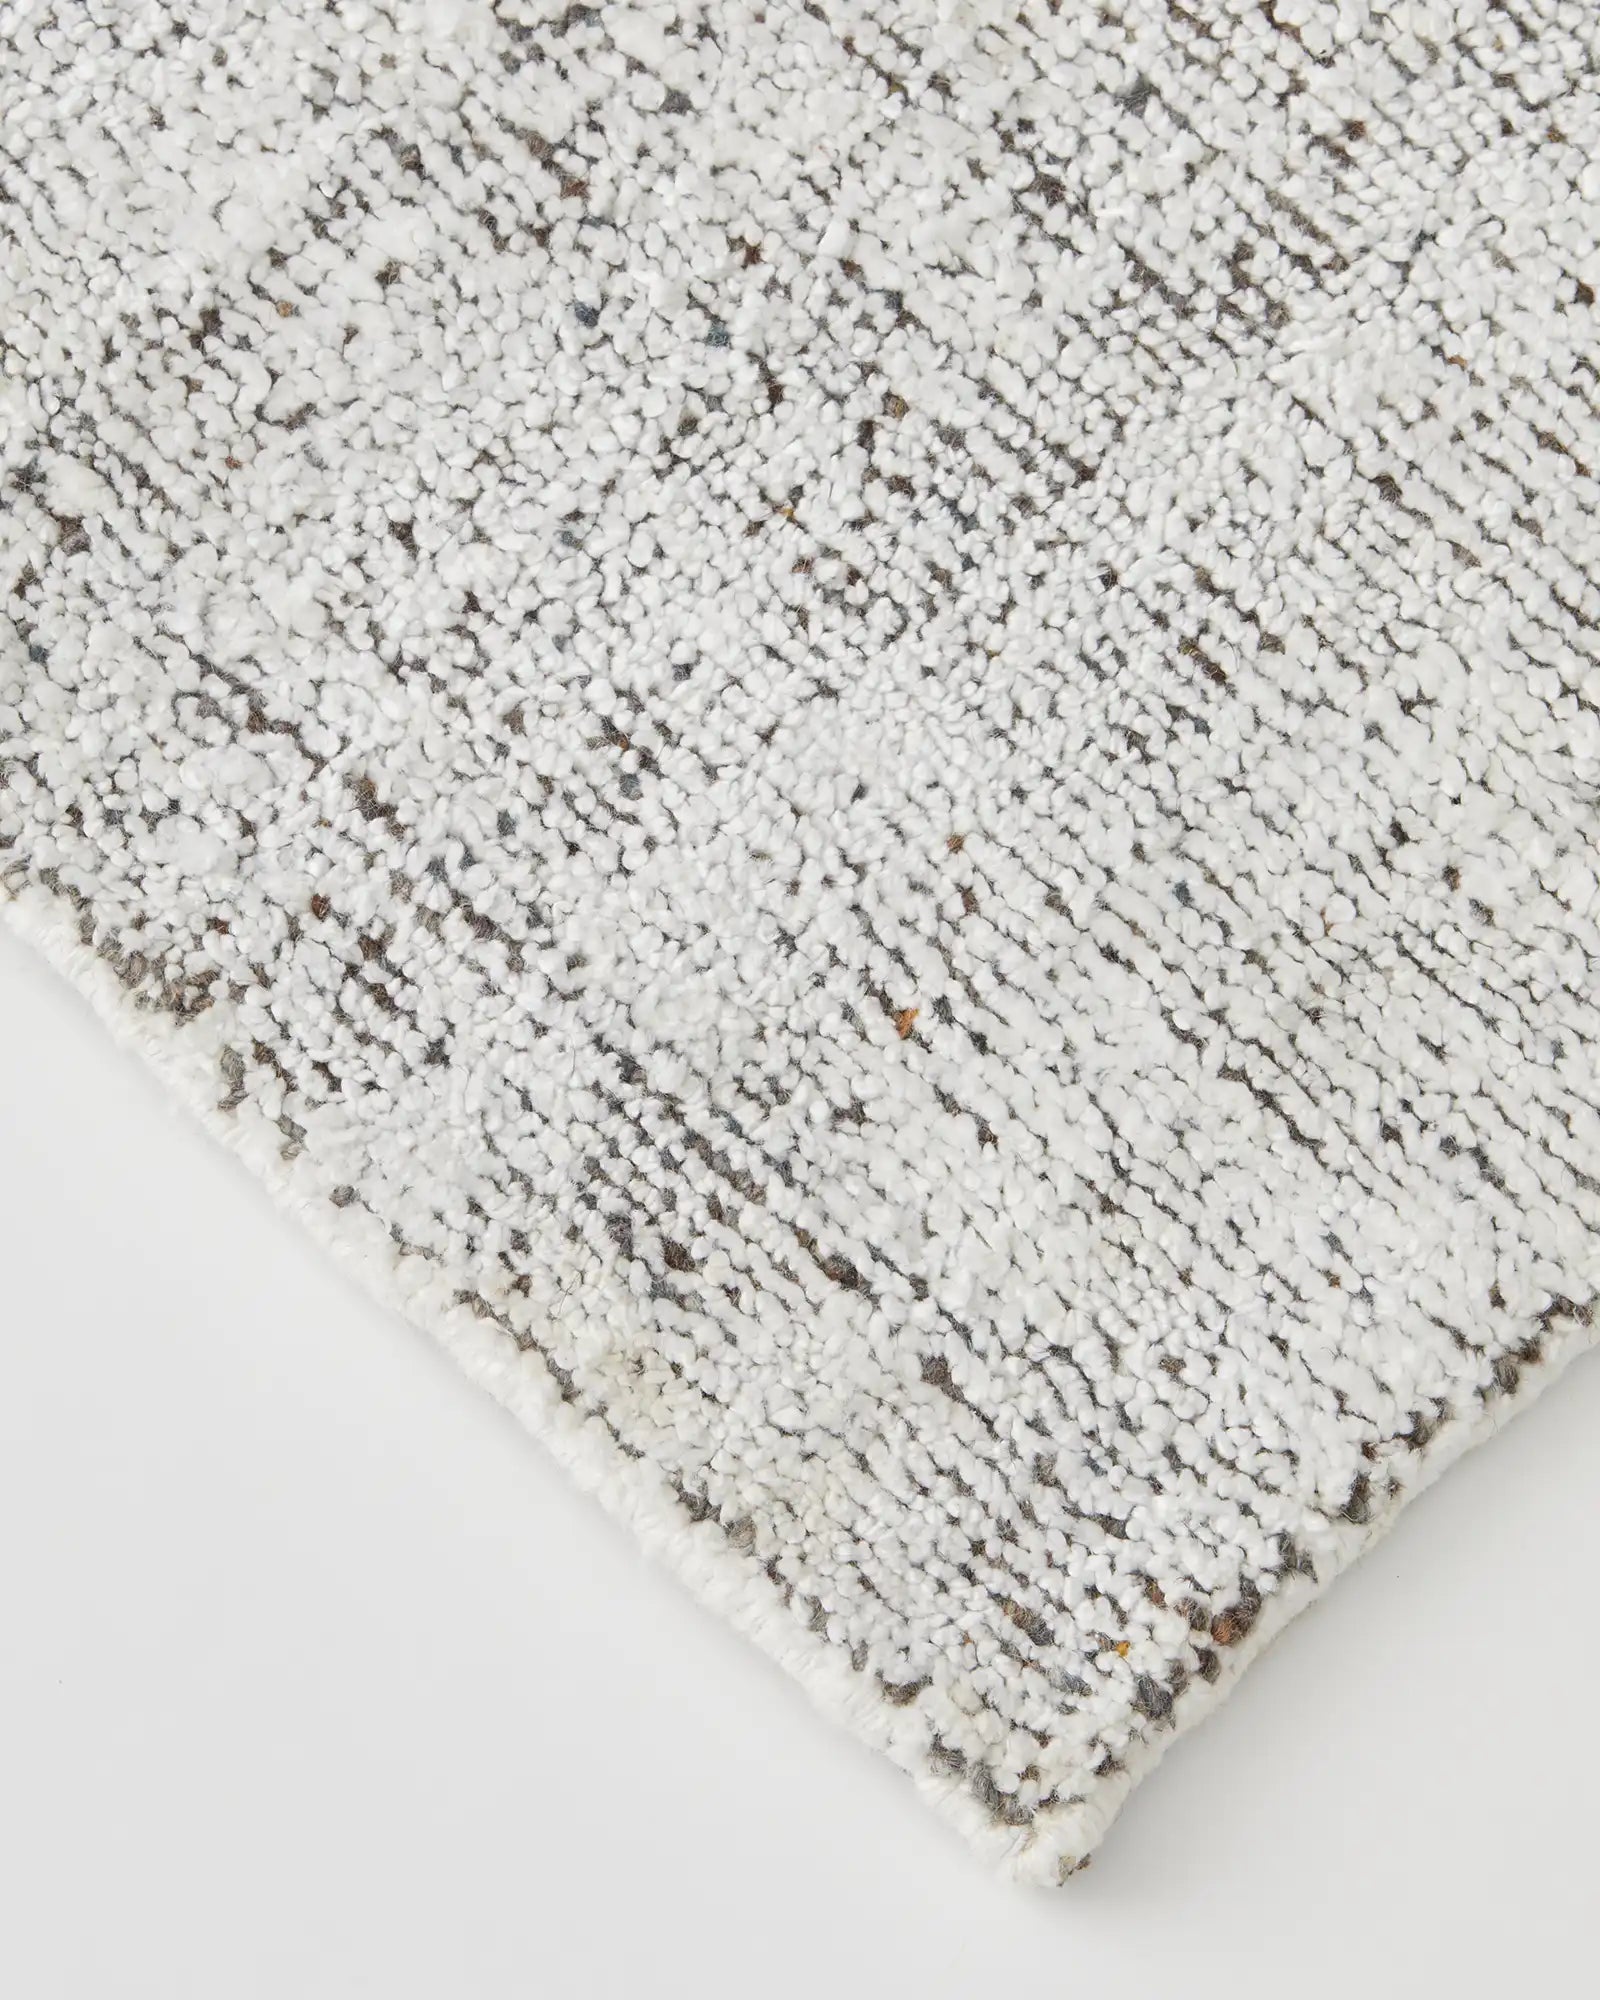 Photo of the rug's edge, displaying the cotton braided edge and full cotton backing for added durability.